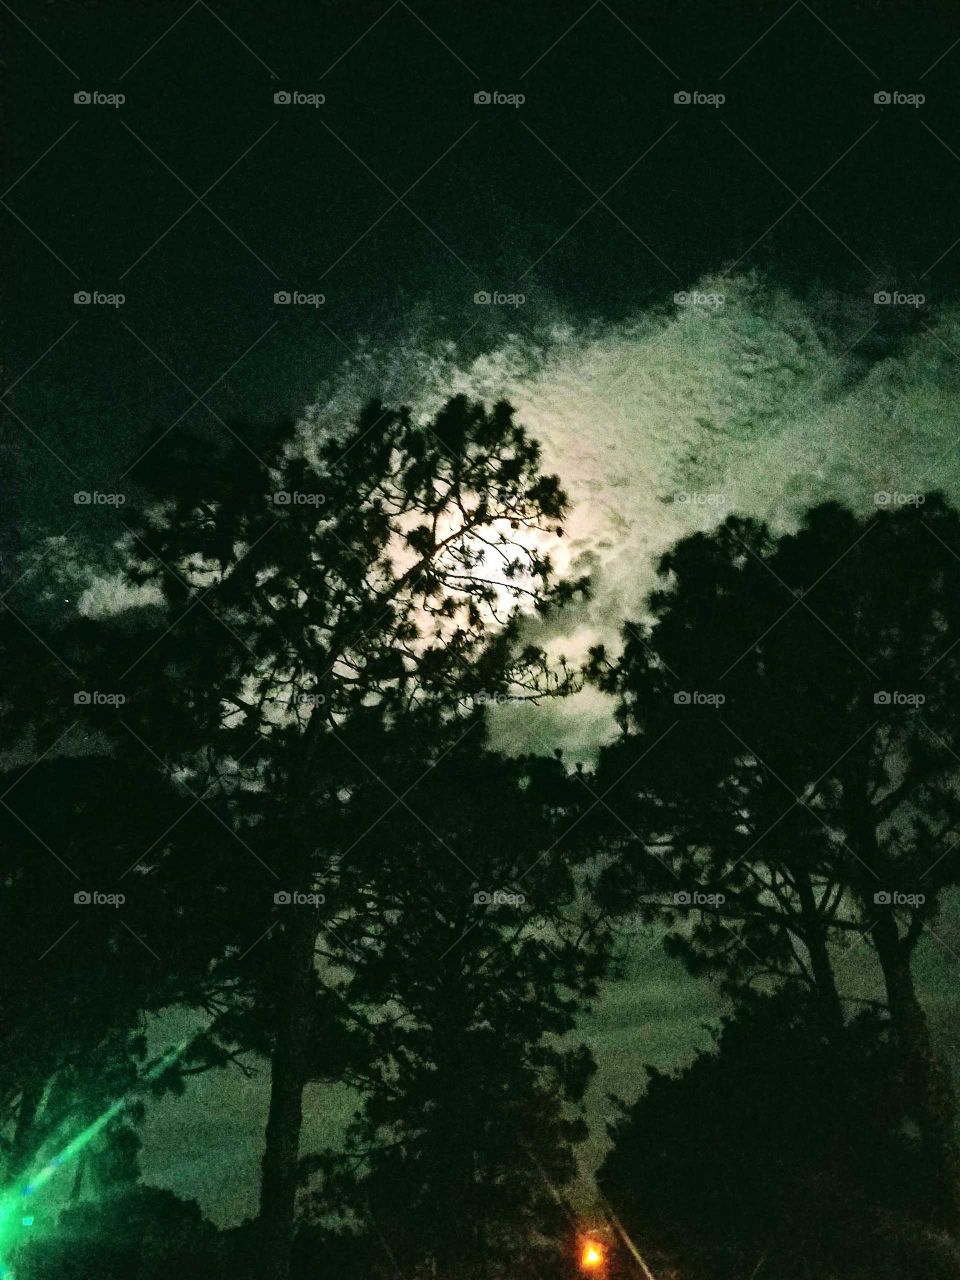 looking at the midnight moon through the pines